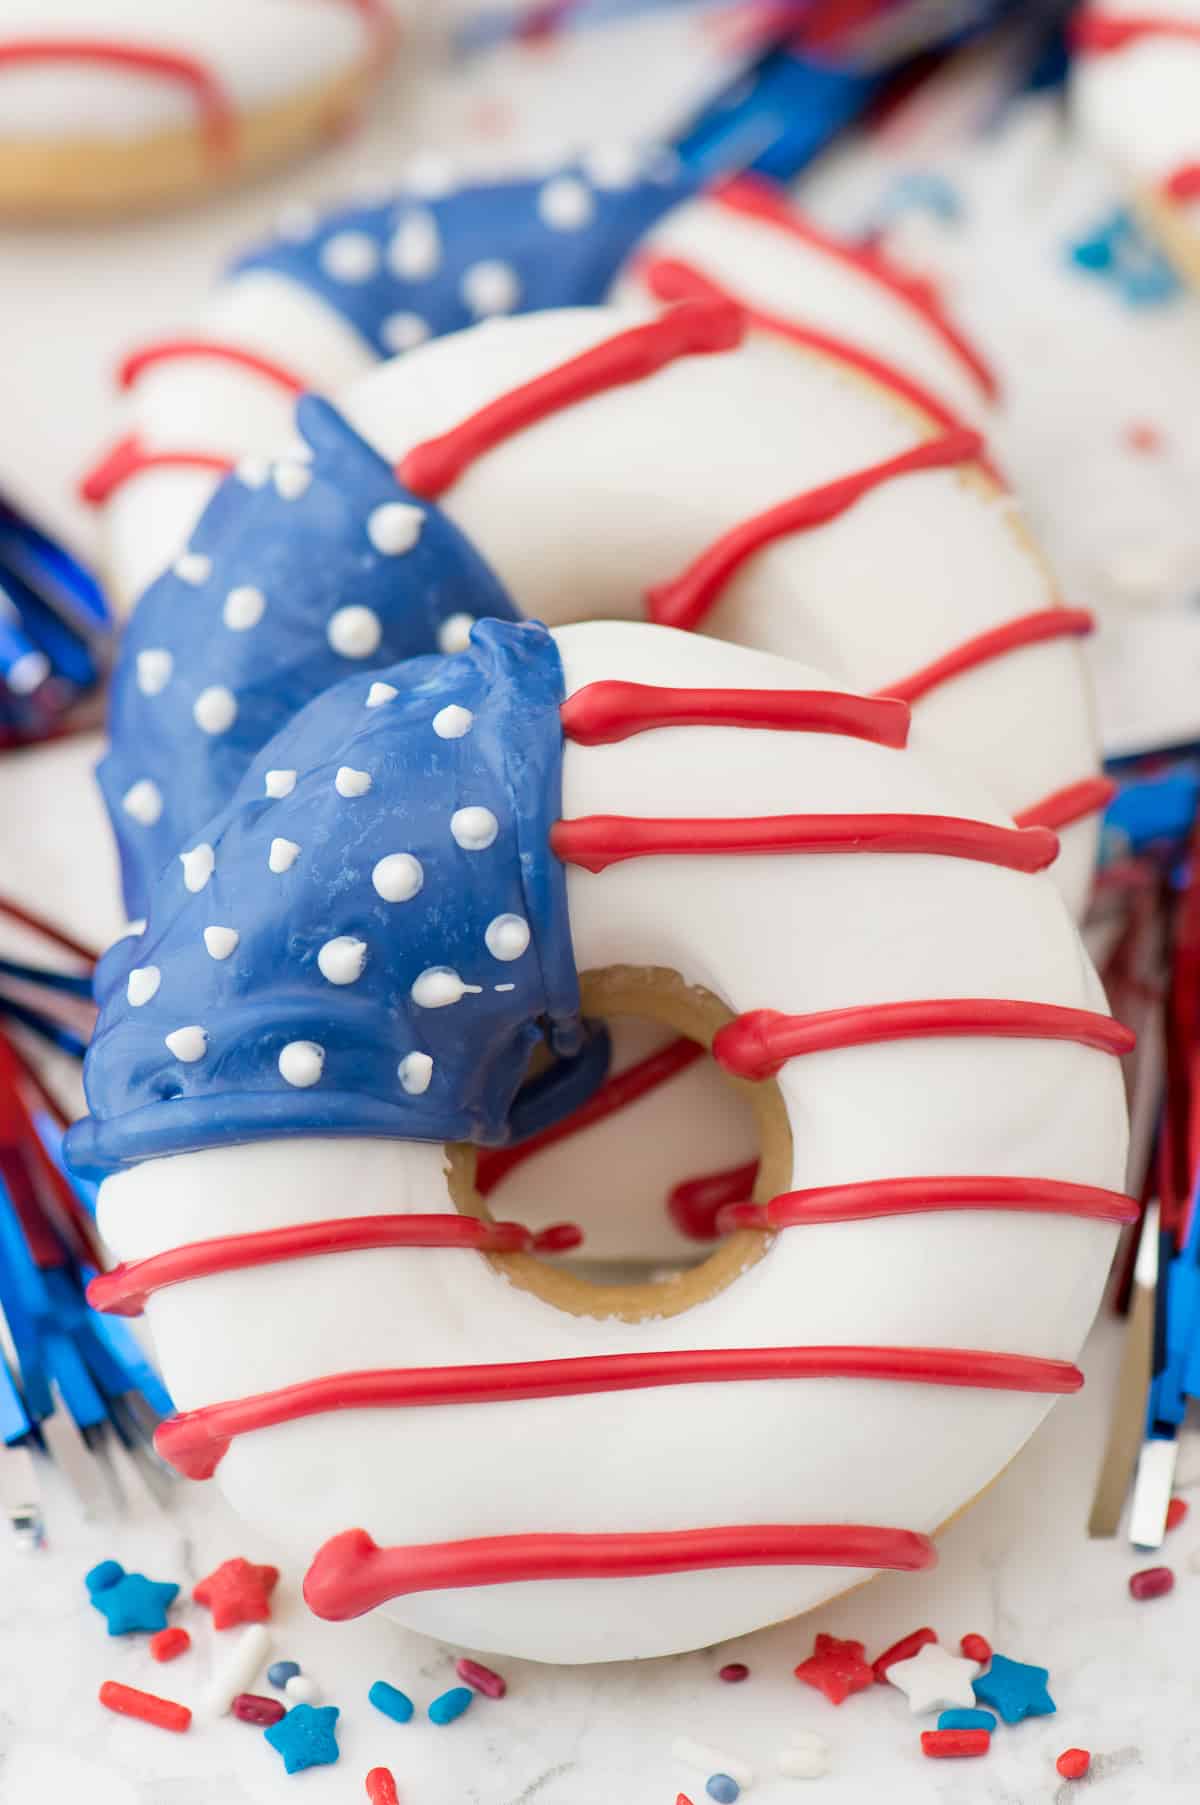 baked vanilla donuts with american flag pattern